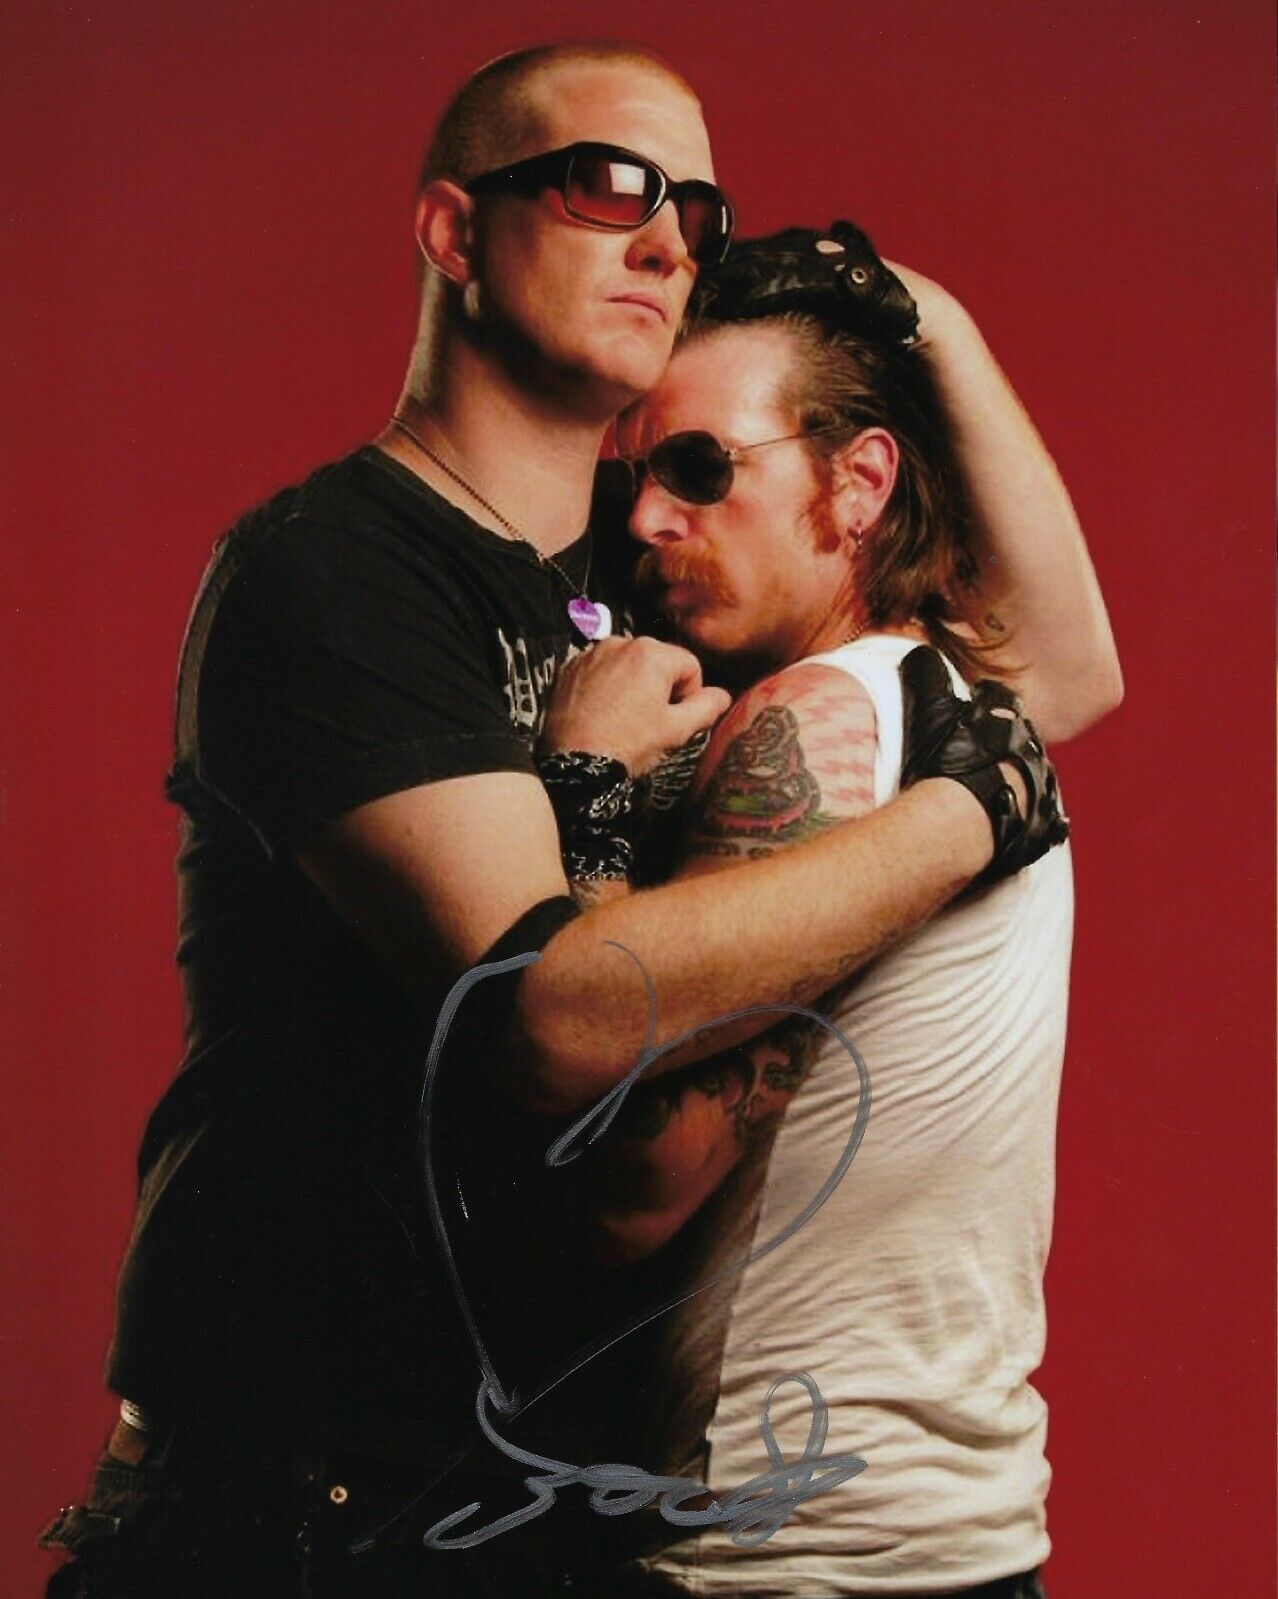 GFA Eagles of Death Metal * JESSE HUGHES * Signed 8x10 Photo Poster painting PROOF J1 COA